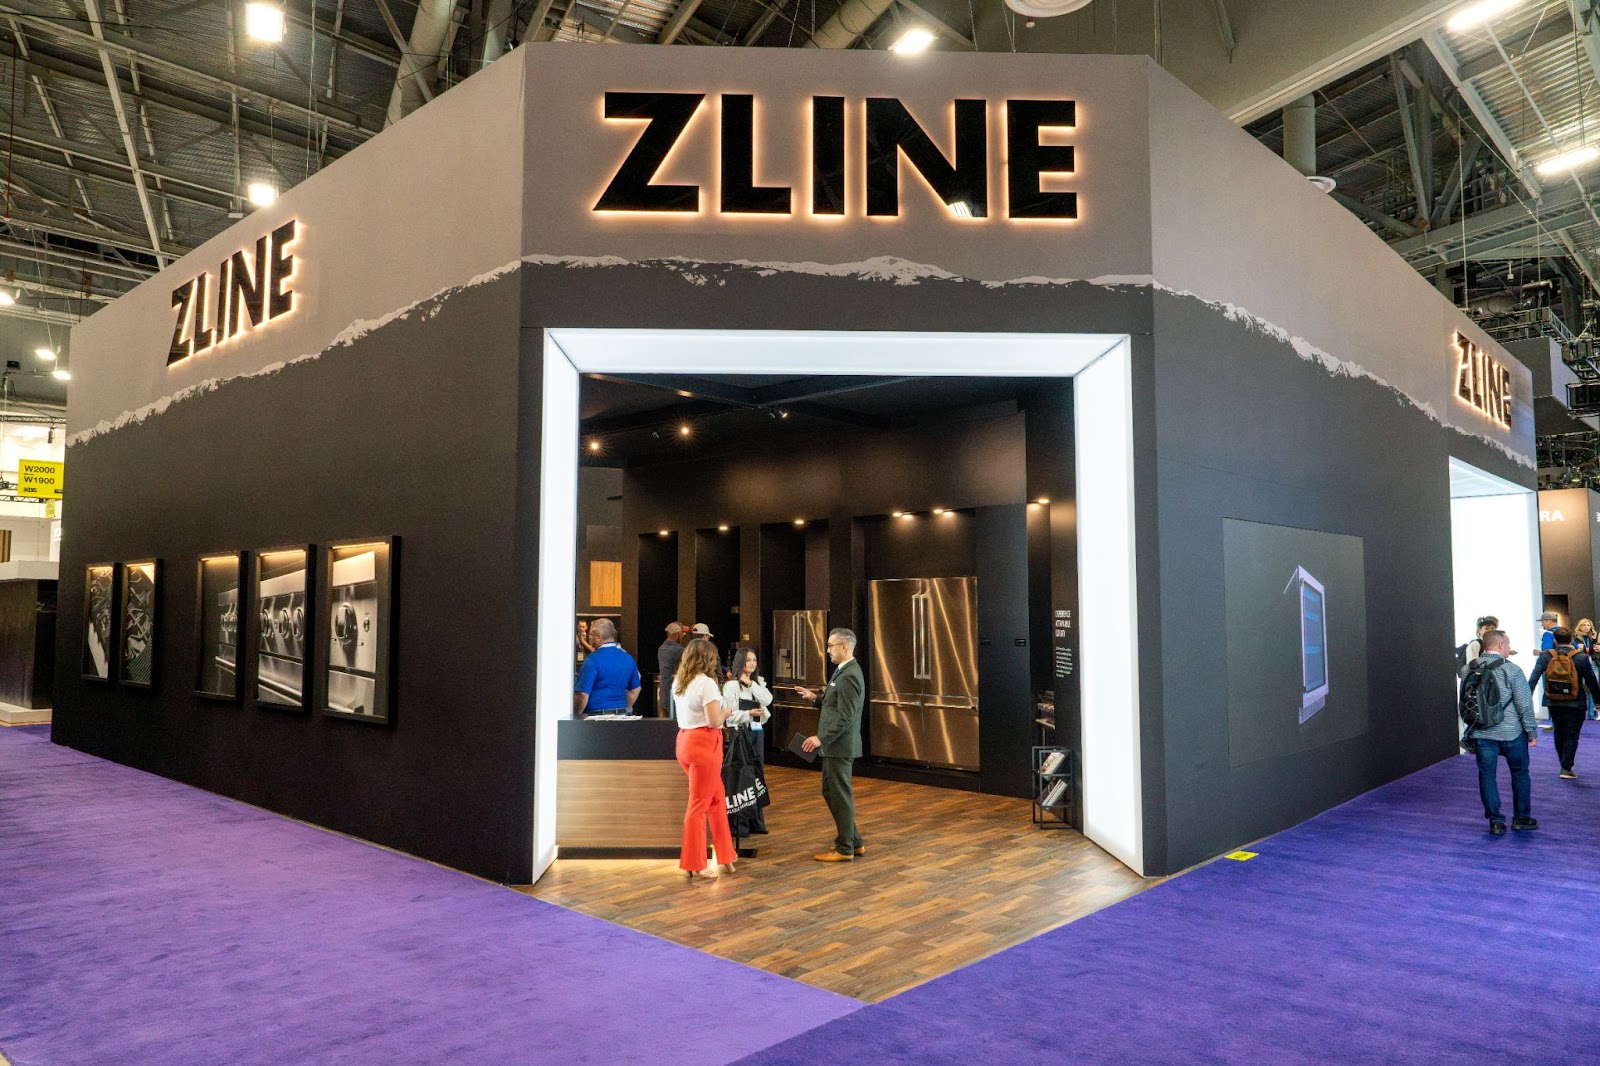 A trade show booth with prominent 'ZLINE Kitchen and Bath' branding on its facade, featuring visitors and staff. The booth is designed with a dark exterior, illuminated company logo, and a welcoming entrance framed by mountain peak graphics.